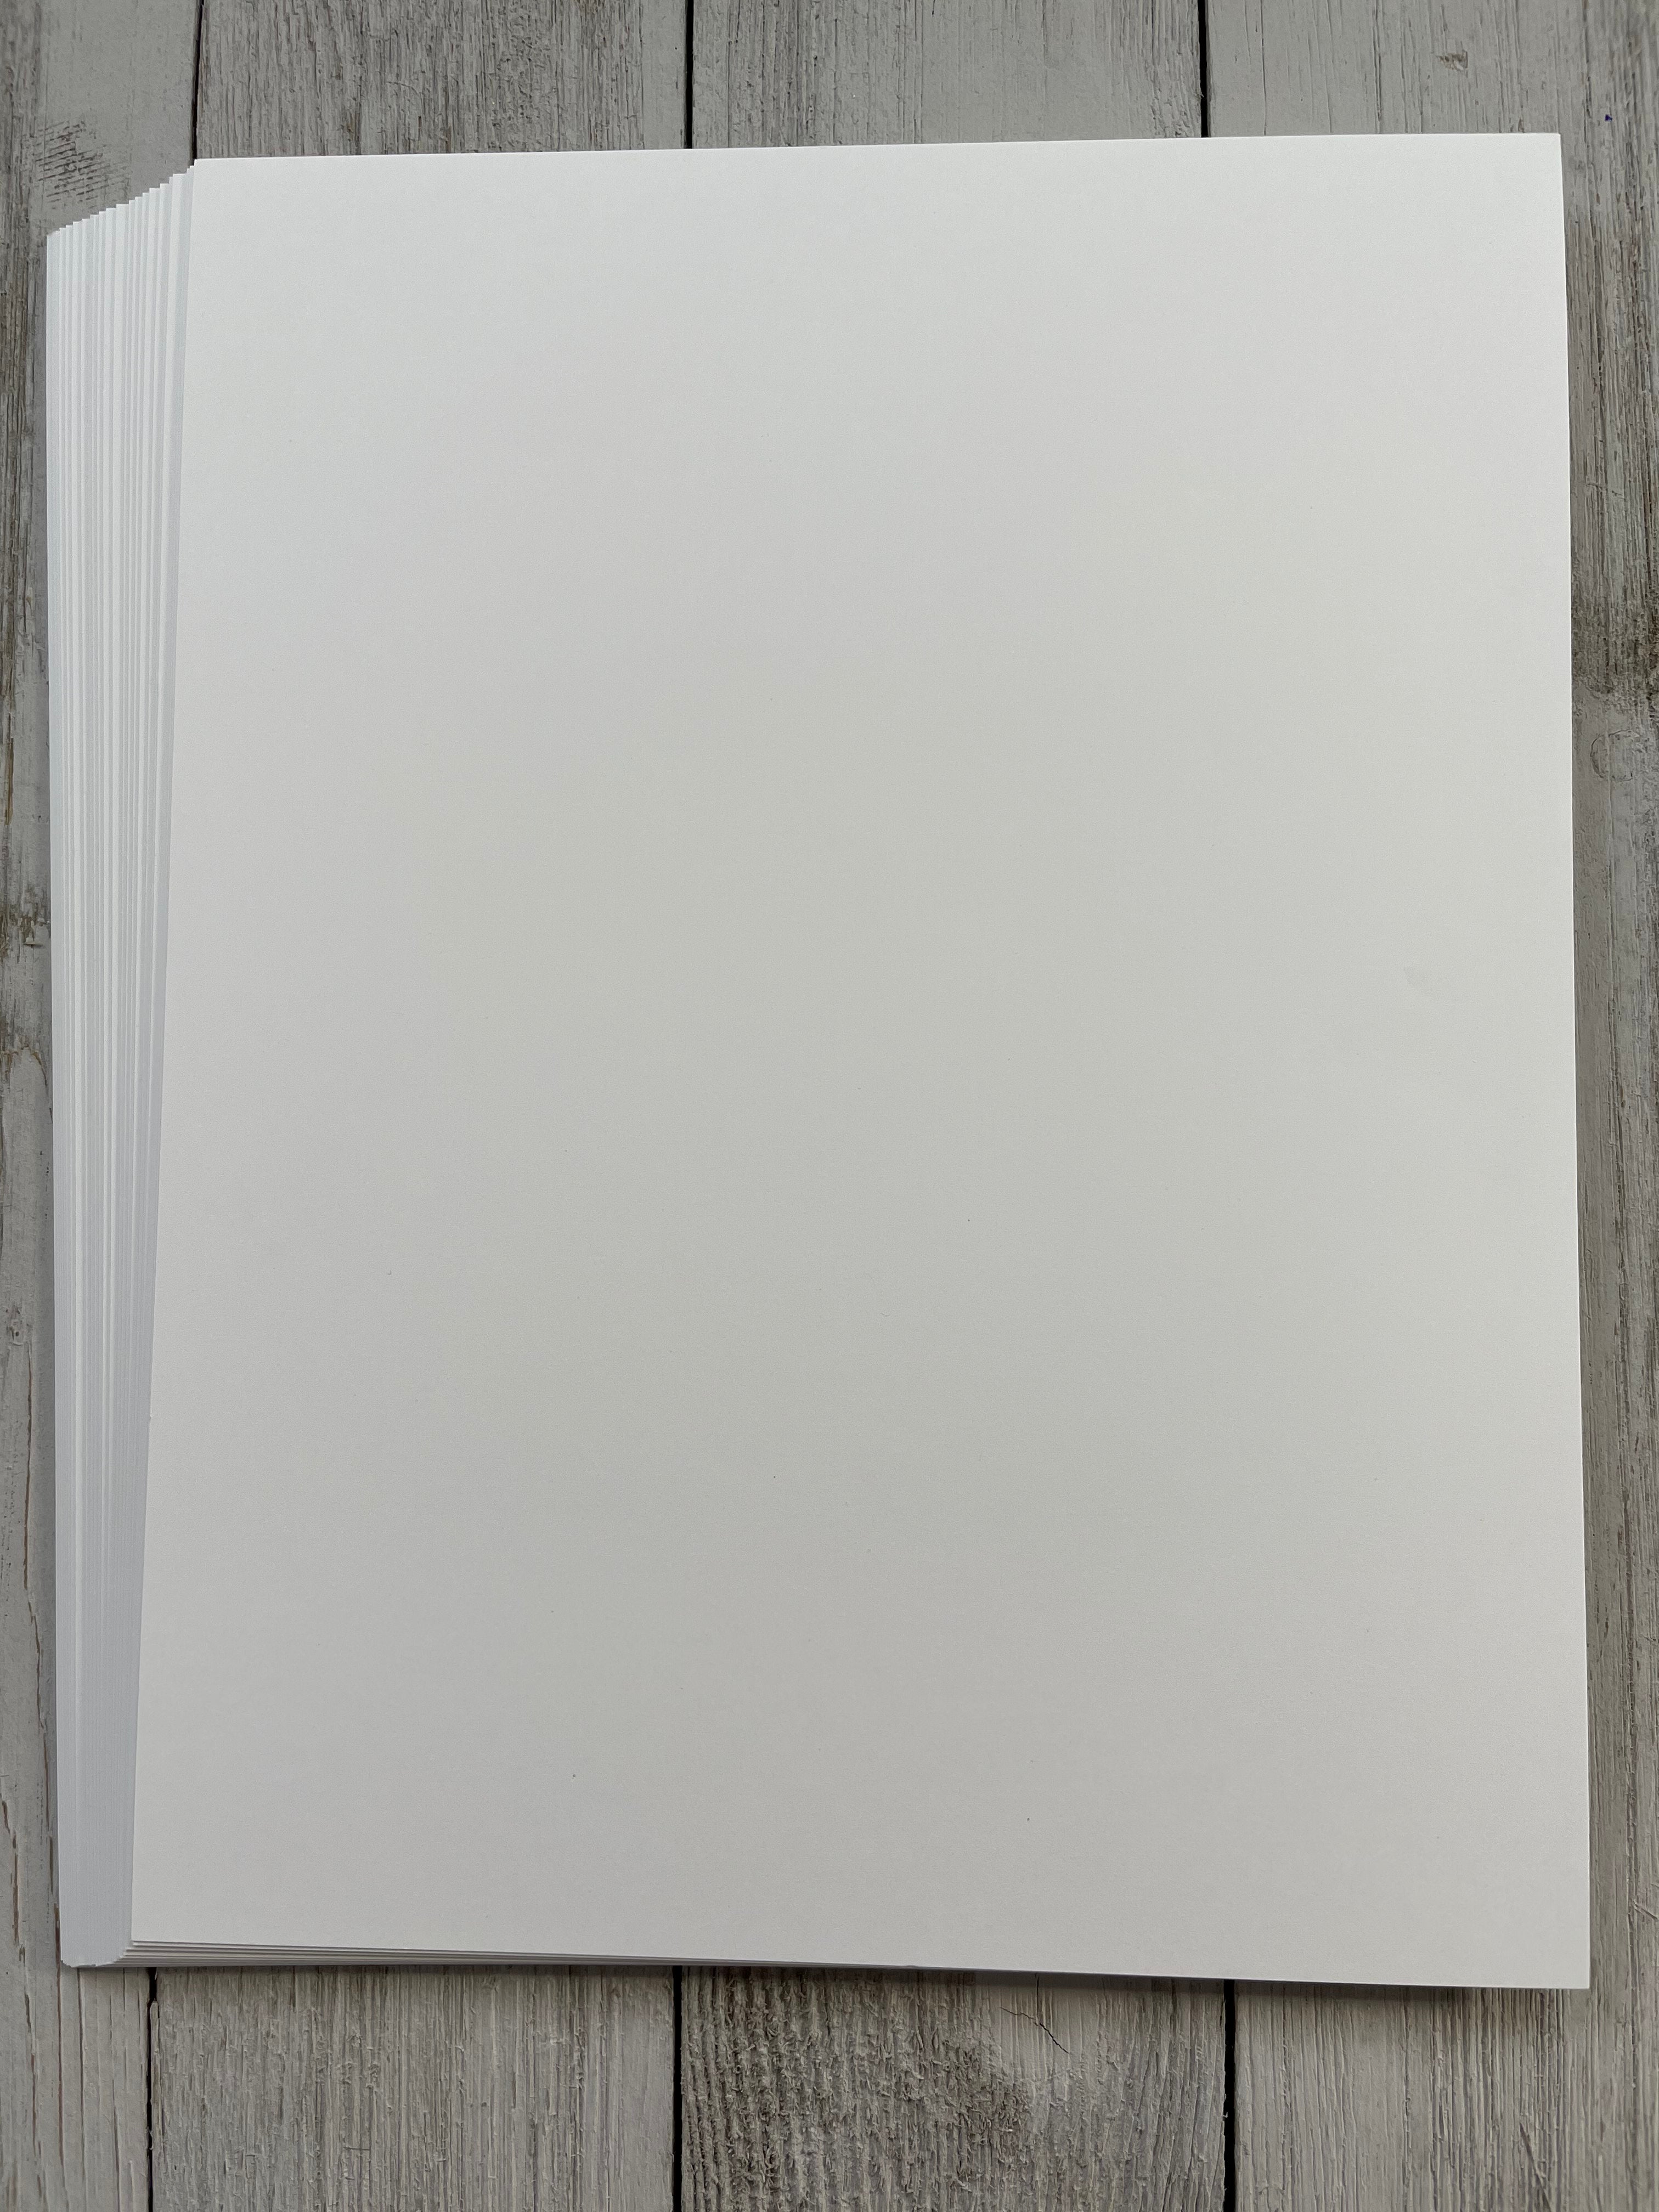 Ecstasy Crafts White Card Stock 25 Sheets